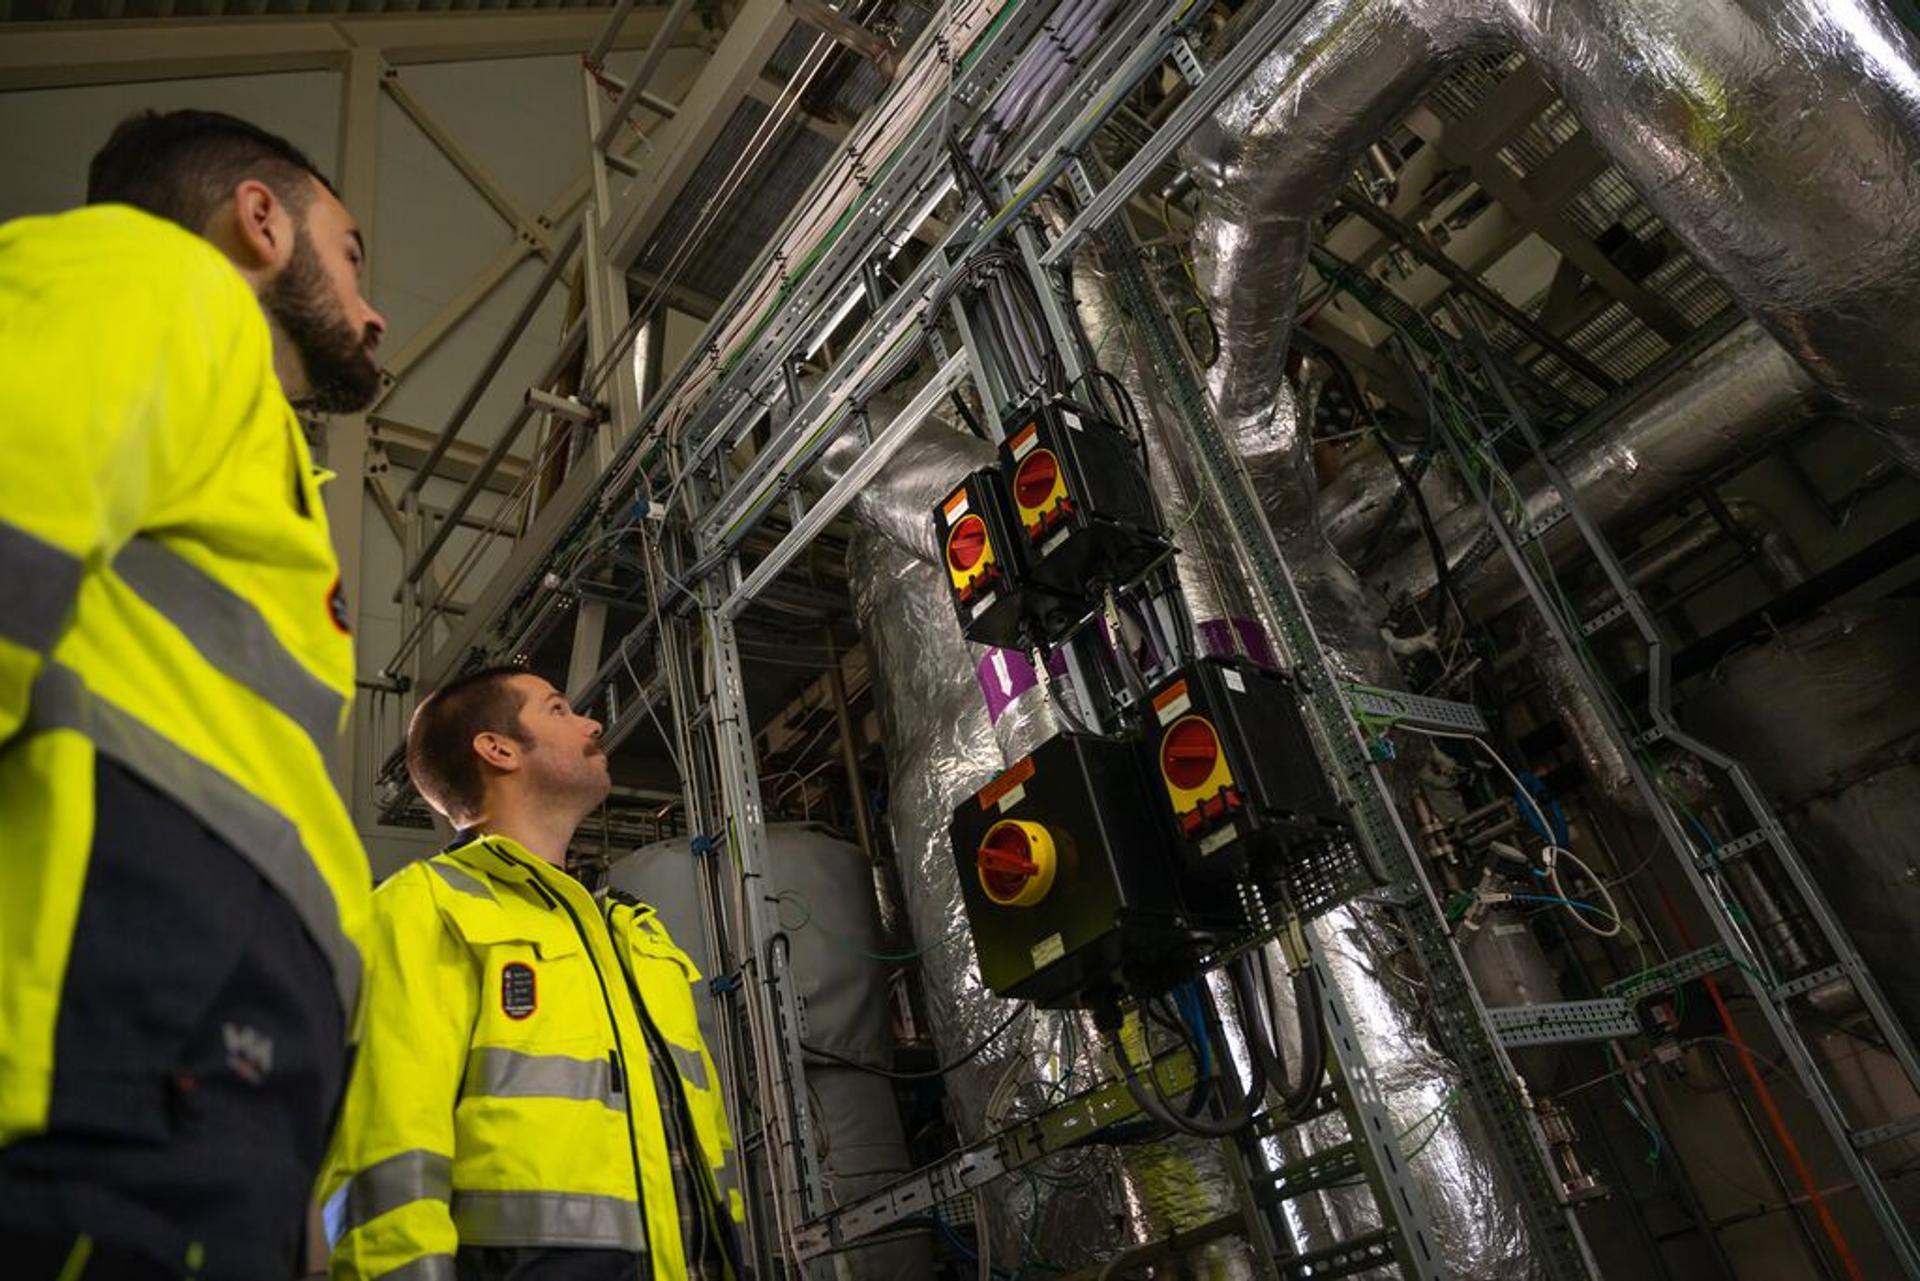 Two workers in yellow jackets inspecting a hydrogen plant